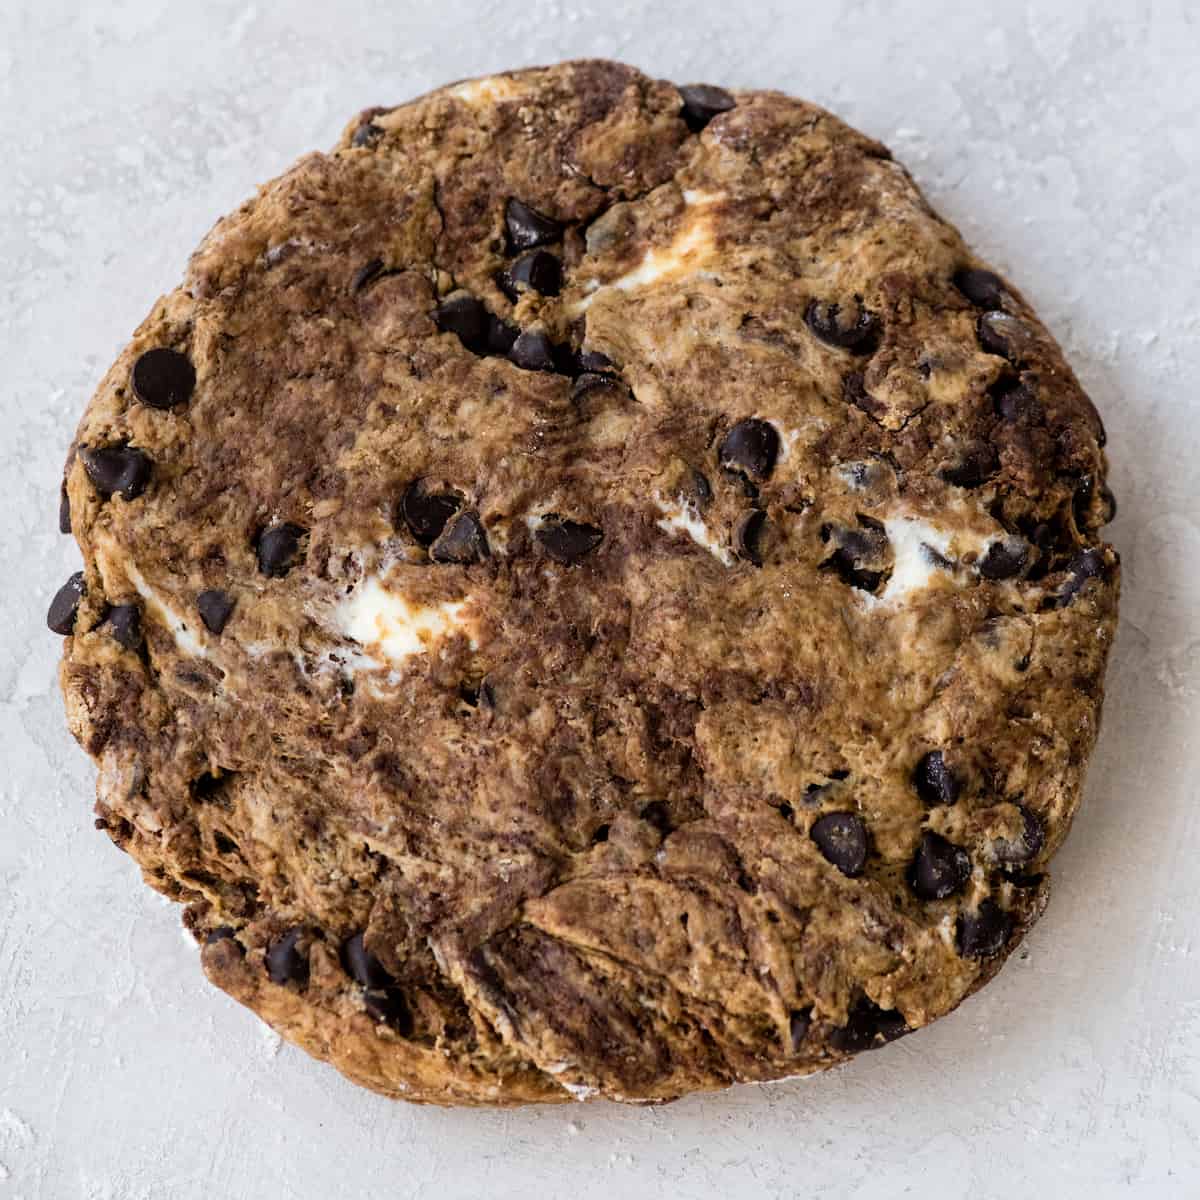 overhead up close view of the chocolate scone dough shaped into a circle